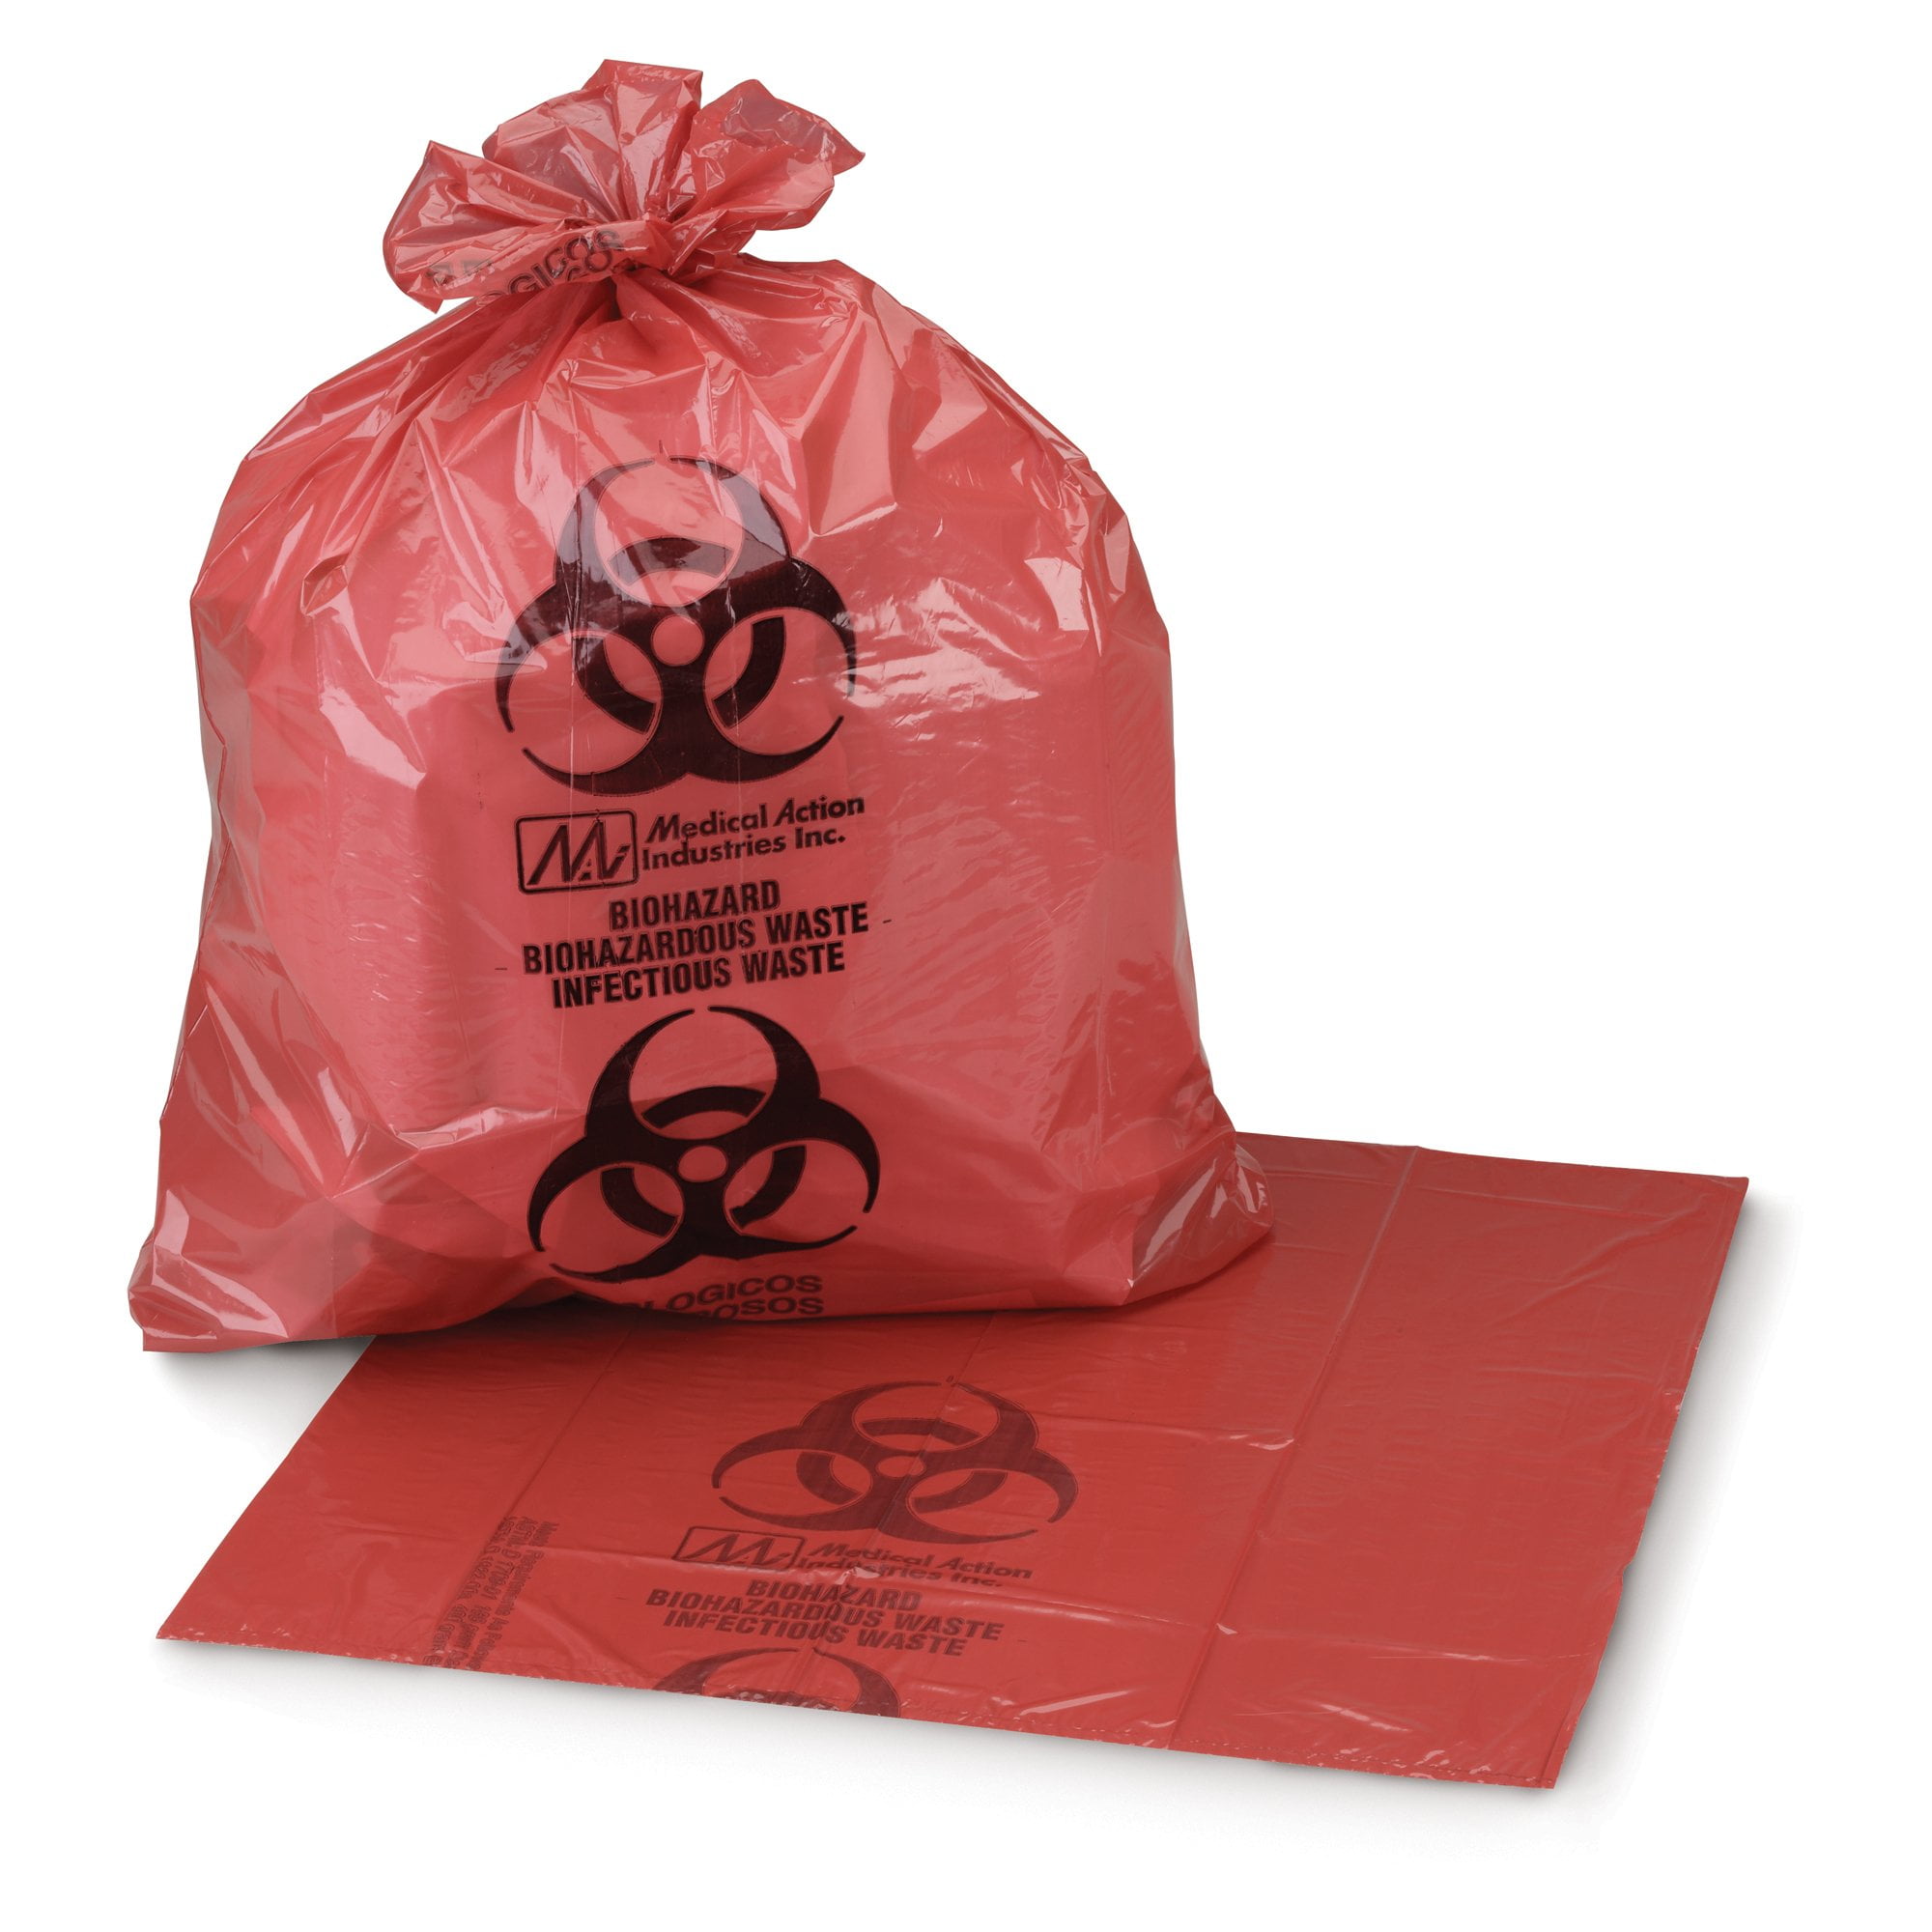 Resilia Medical Meets DOT ASTM Standards for Hospital Use 24x24 Inches 250 Bags Red Hazardous Waste Disposal 10 Gallon Biohazard Bags